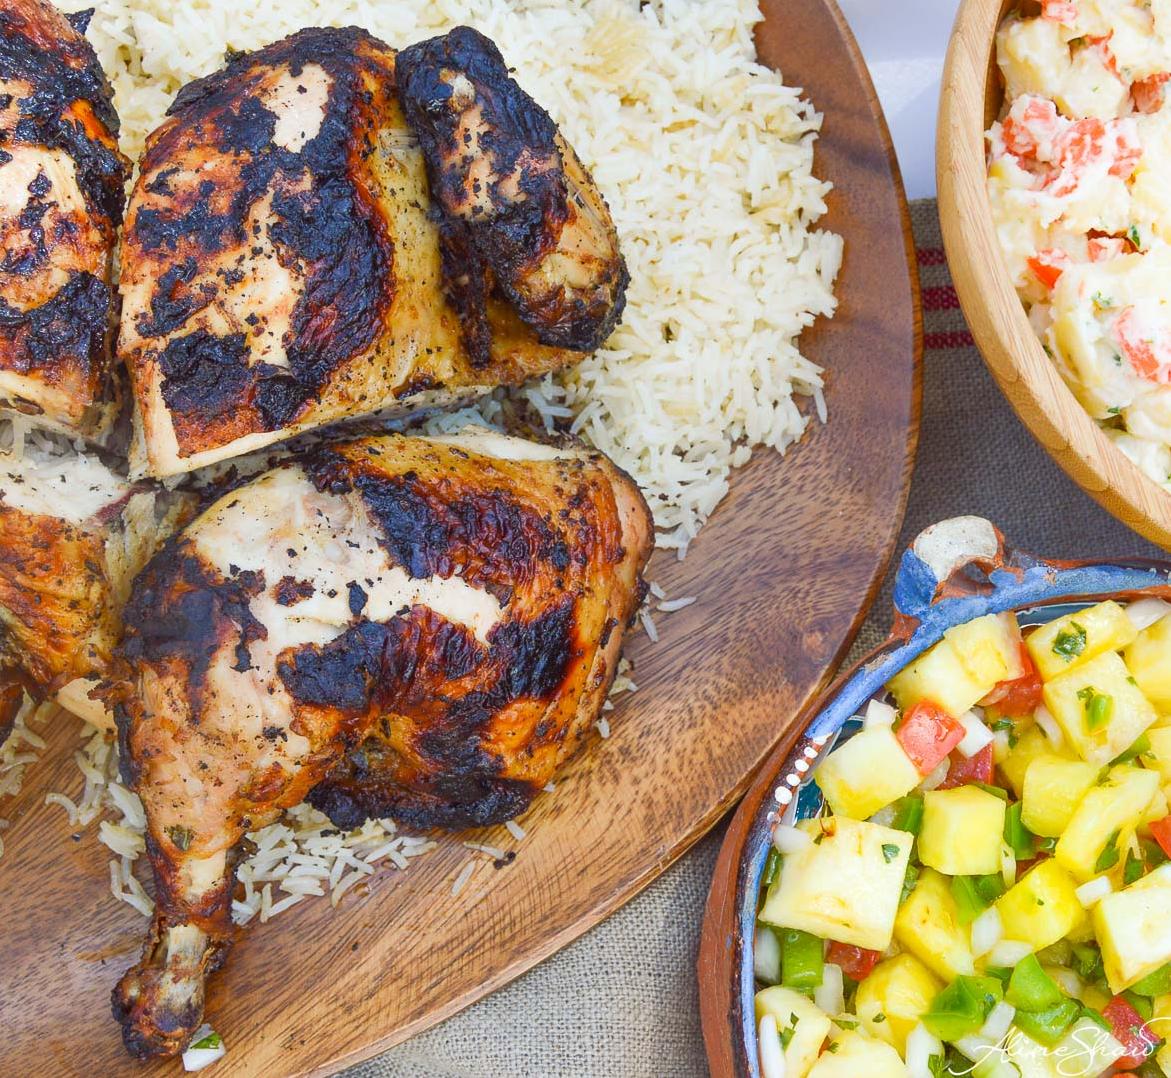  Moist, tender, and bursting with flavor – this chicken is a must-try!